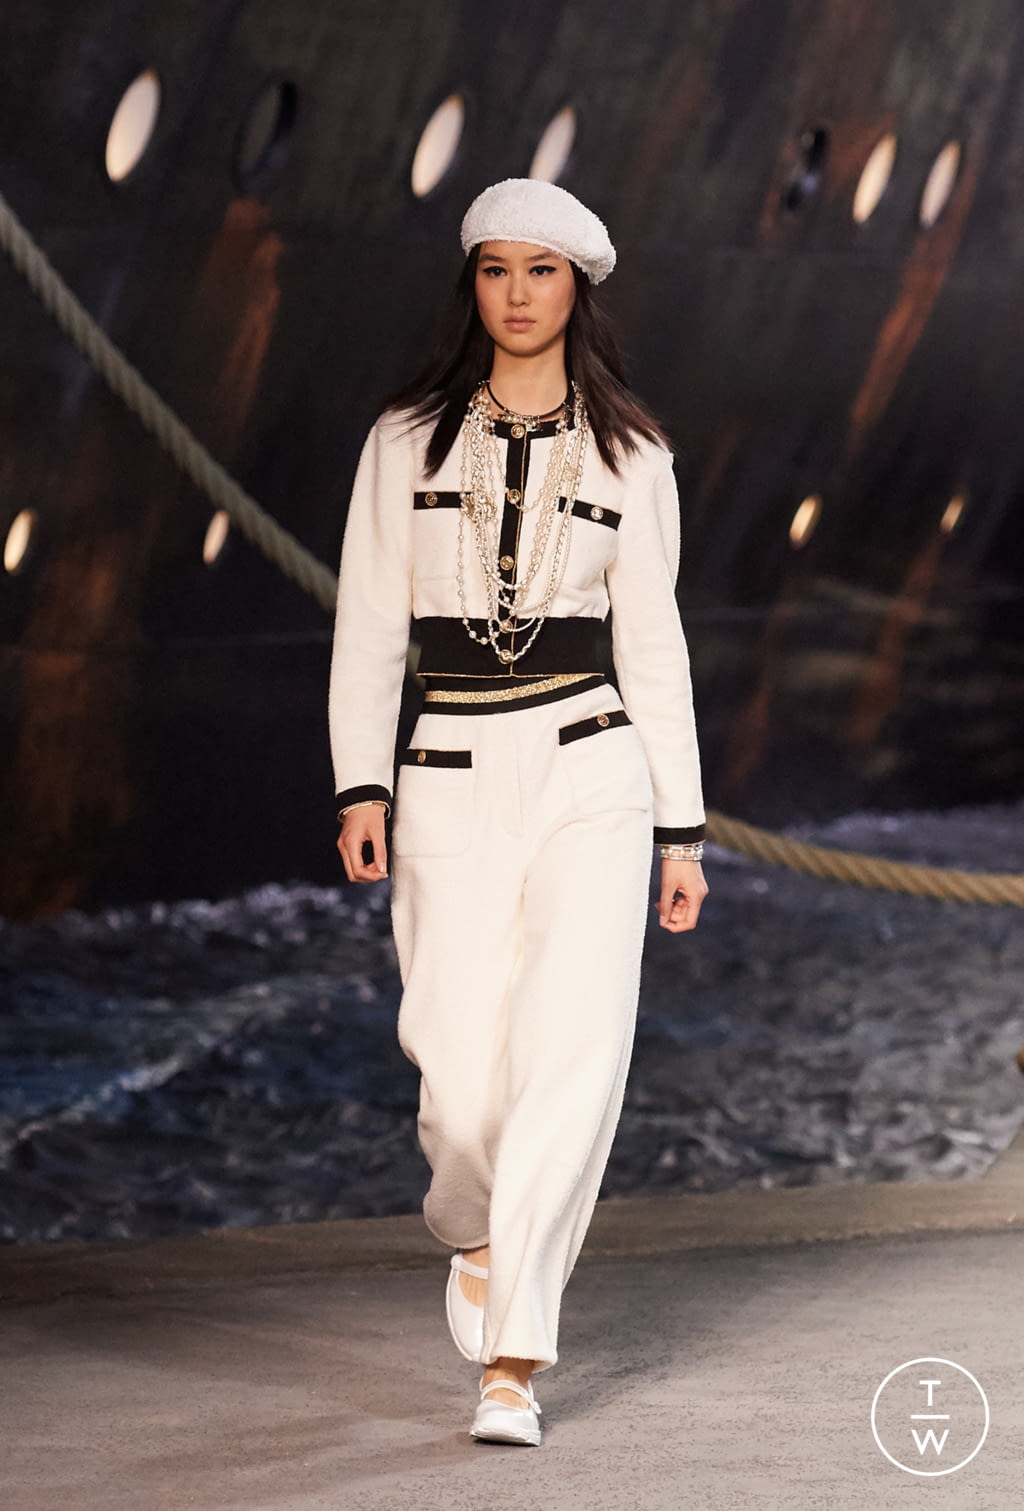 Chanel Resort 2018 collection, runway looks, beauty, models, and reviews.